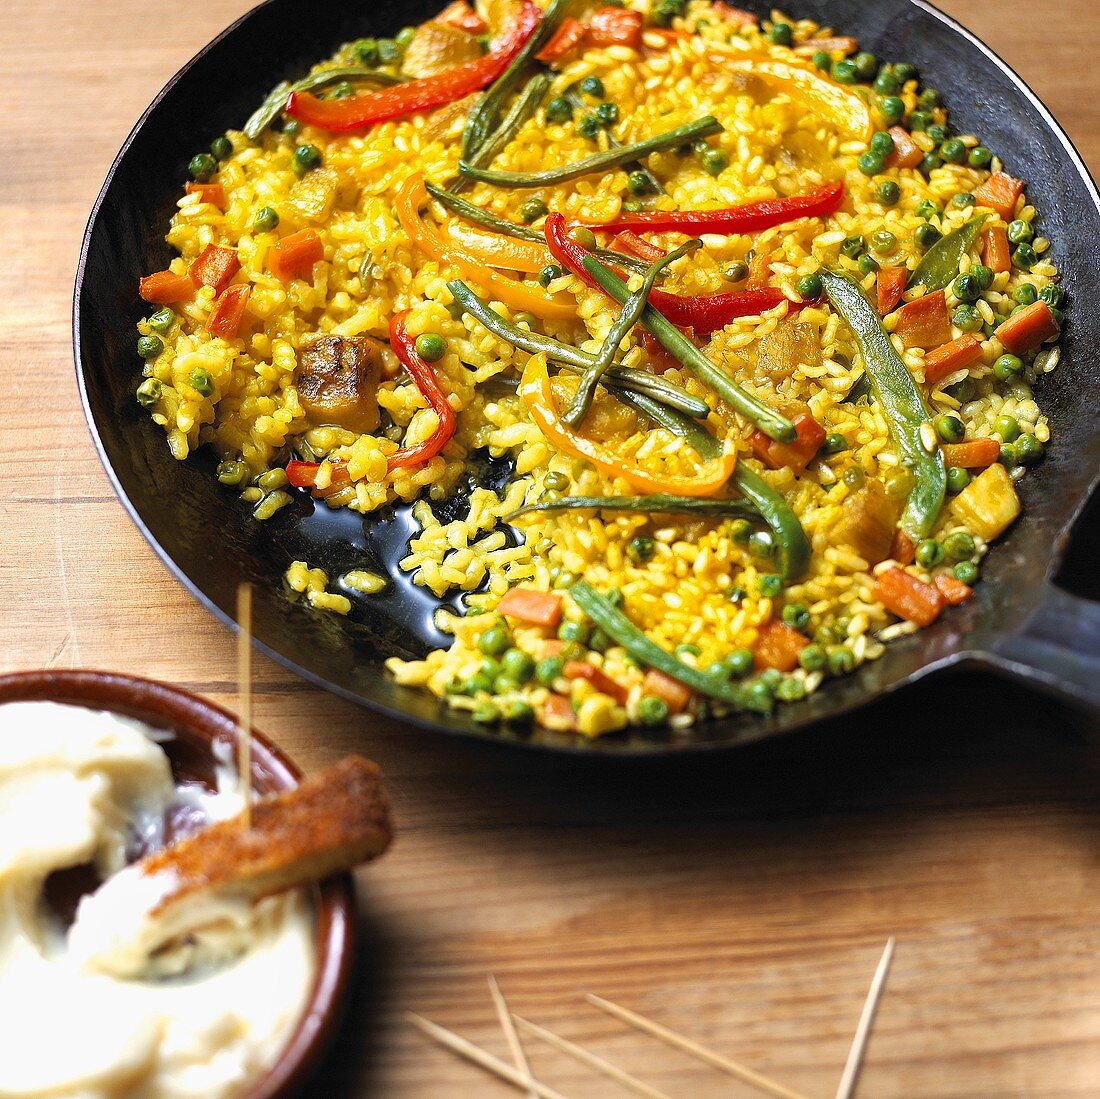 Pan-cooked vegetable and rice dish